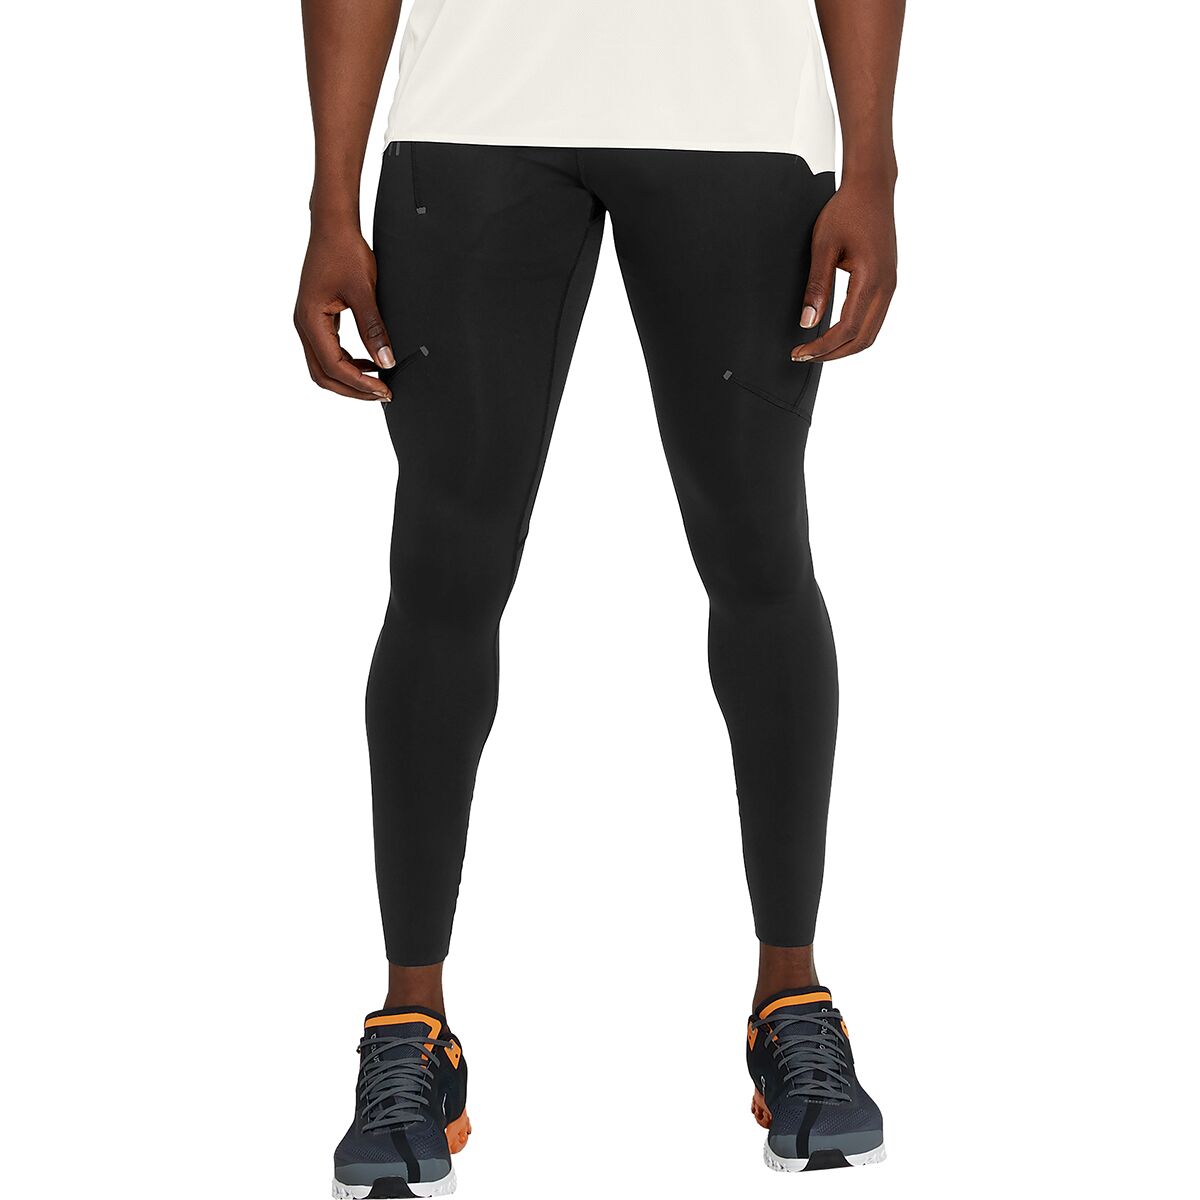 Top 10 performance tights for training, running, and recovery: spring 2017  - Men's Journal